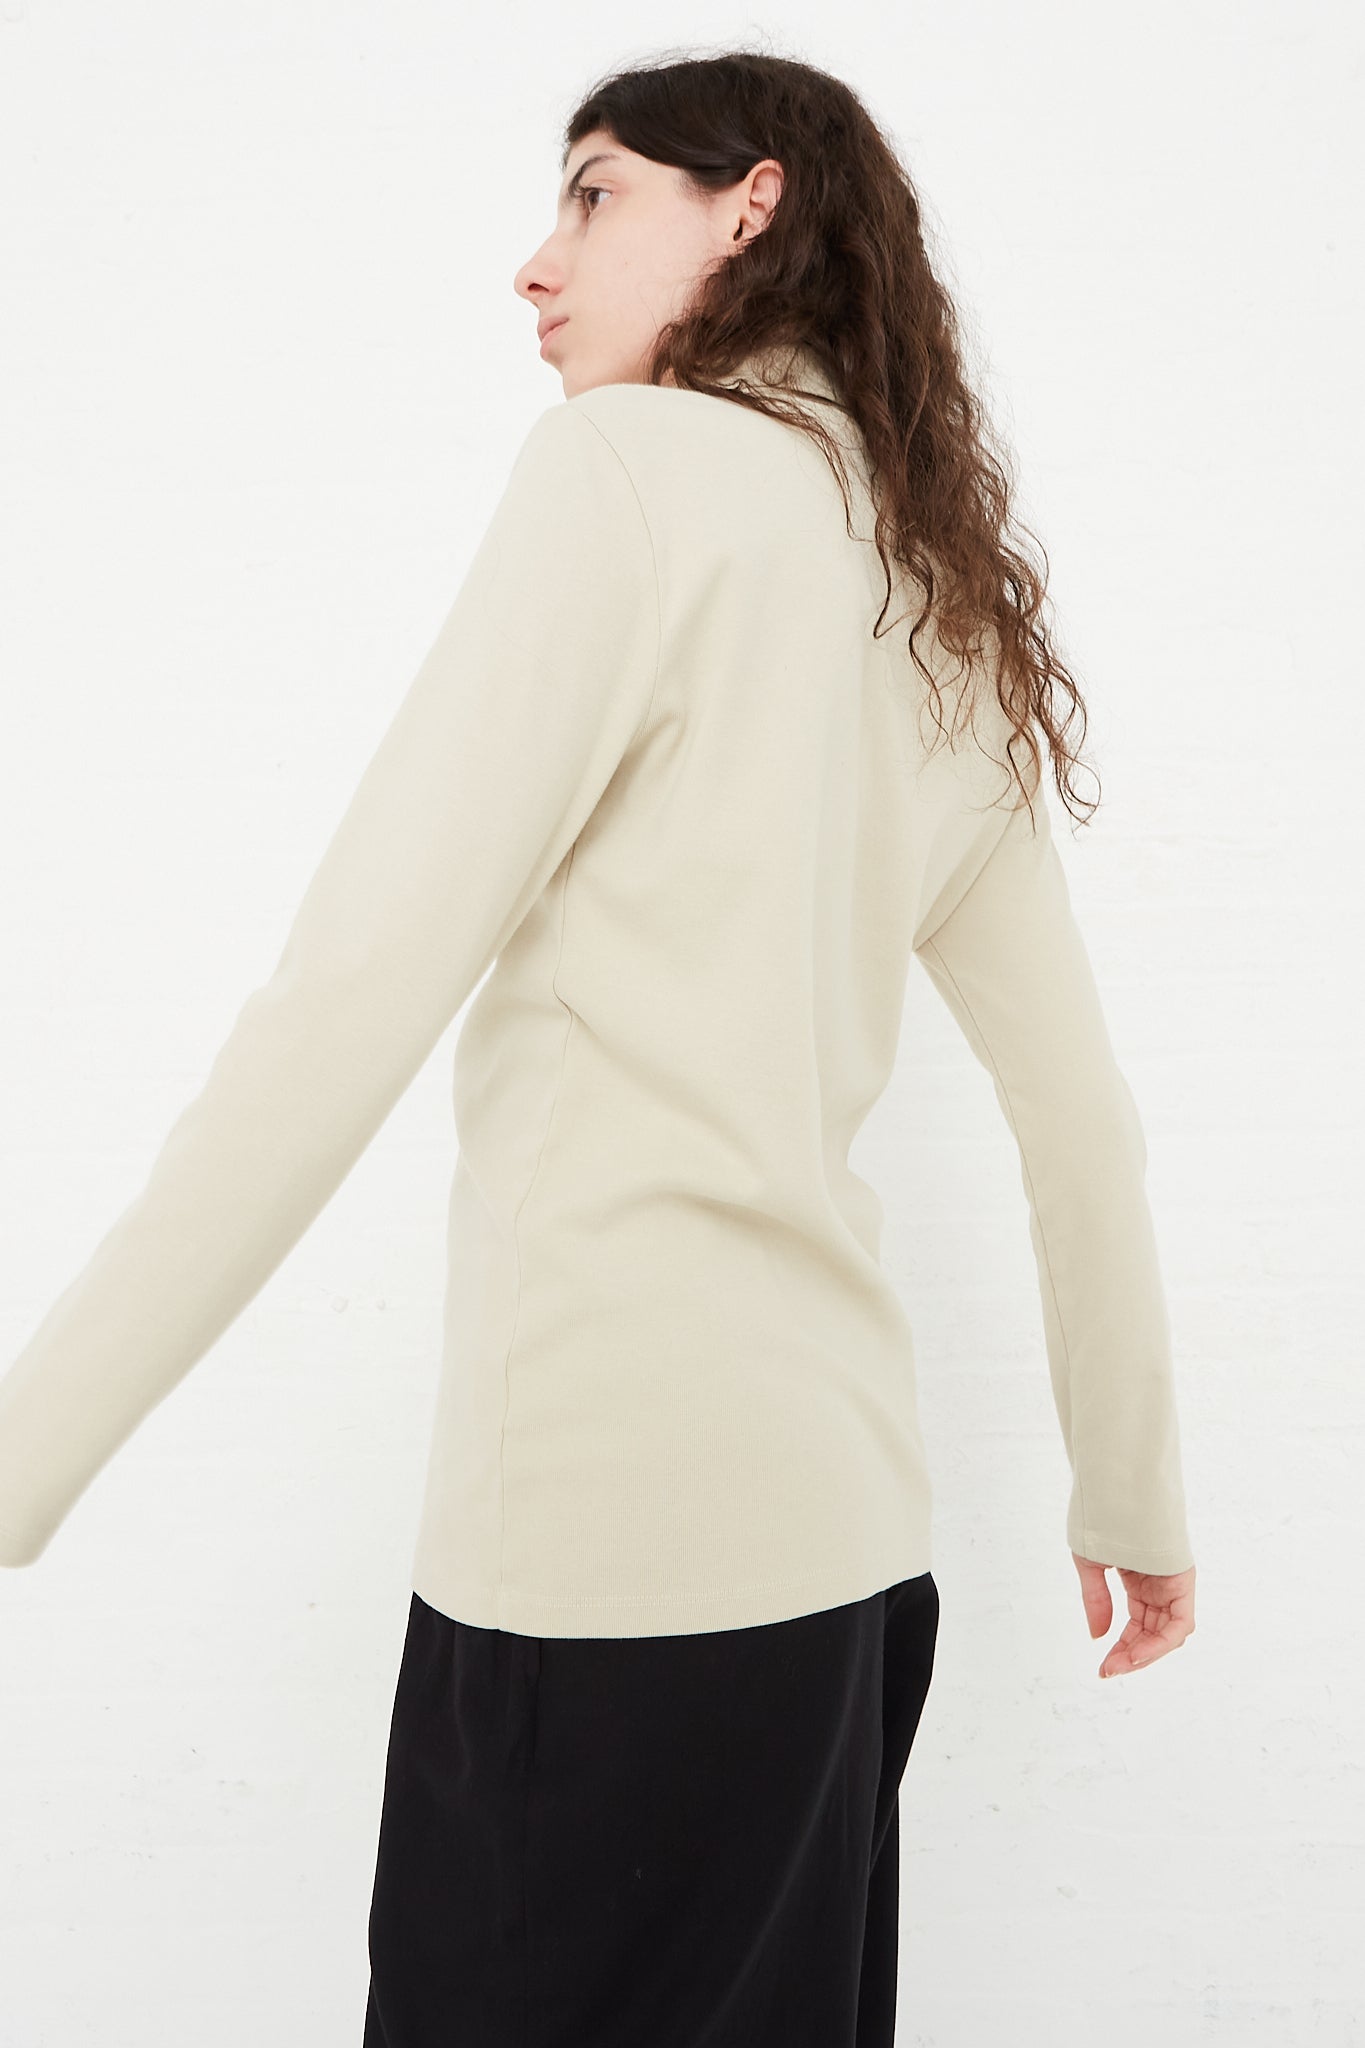 Organic Cotton Rib Knit Turtleneck Top in Ivory by Black Crane for Oroboro Side